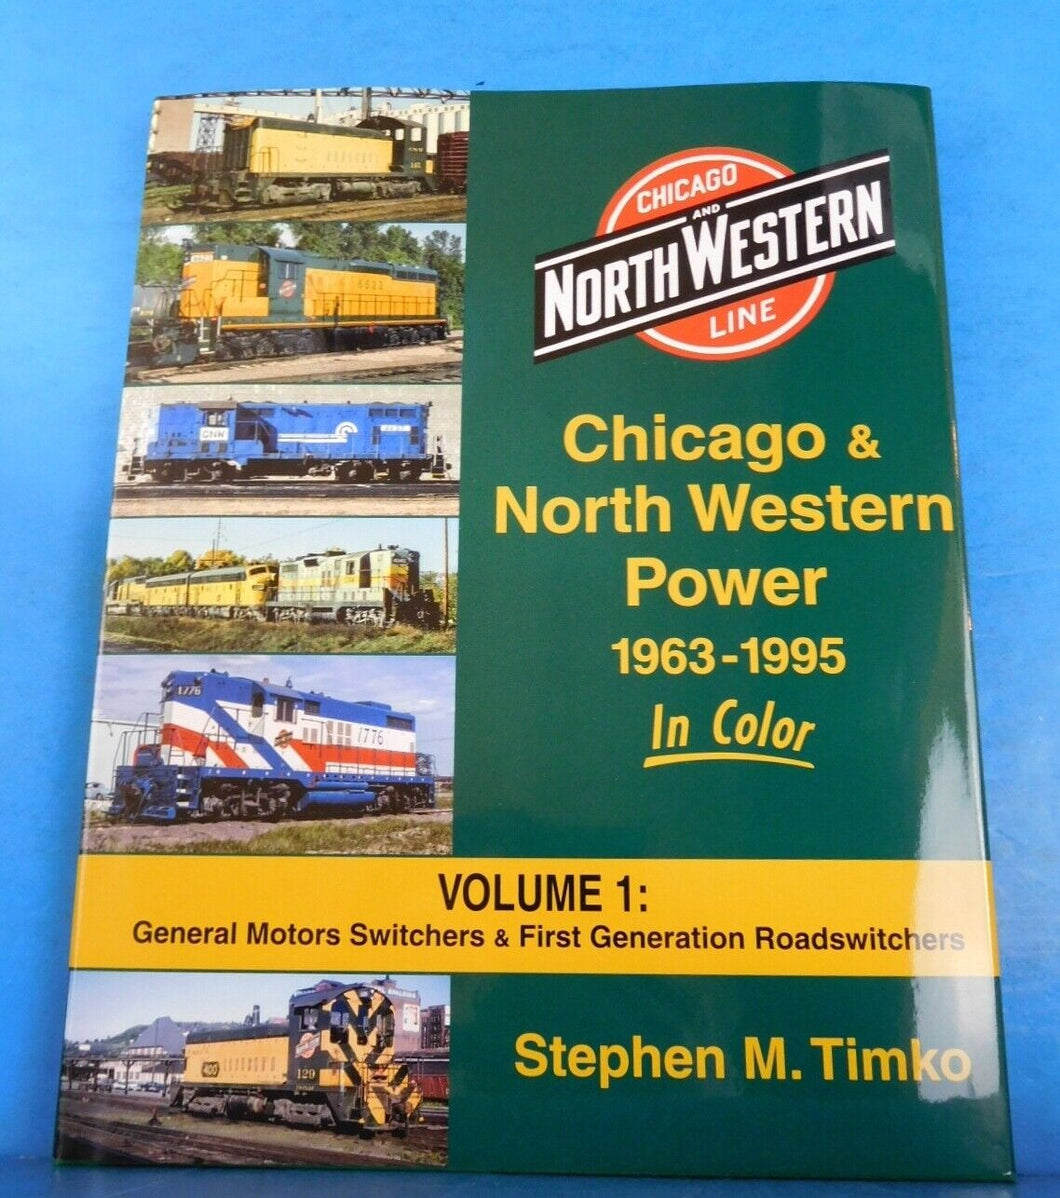 Chicago & North Western Power 1963-1995 Vol 1 GM Switcher Timko Morning Sun book